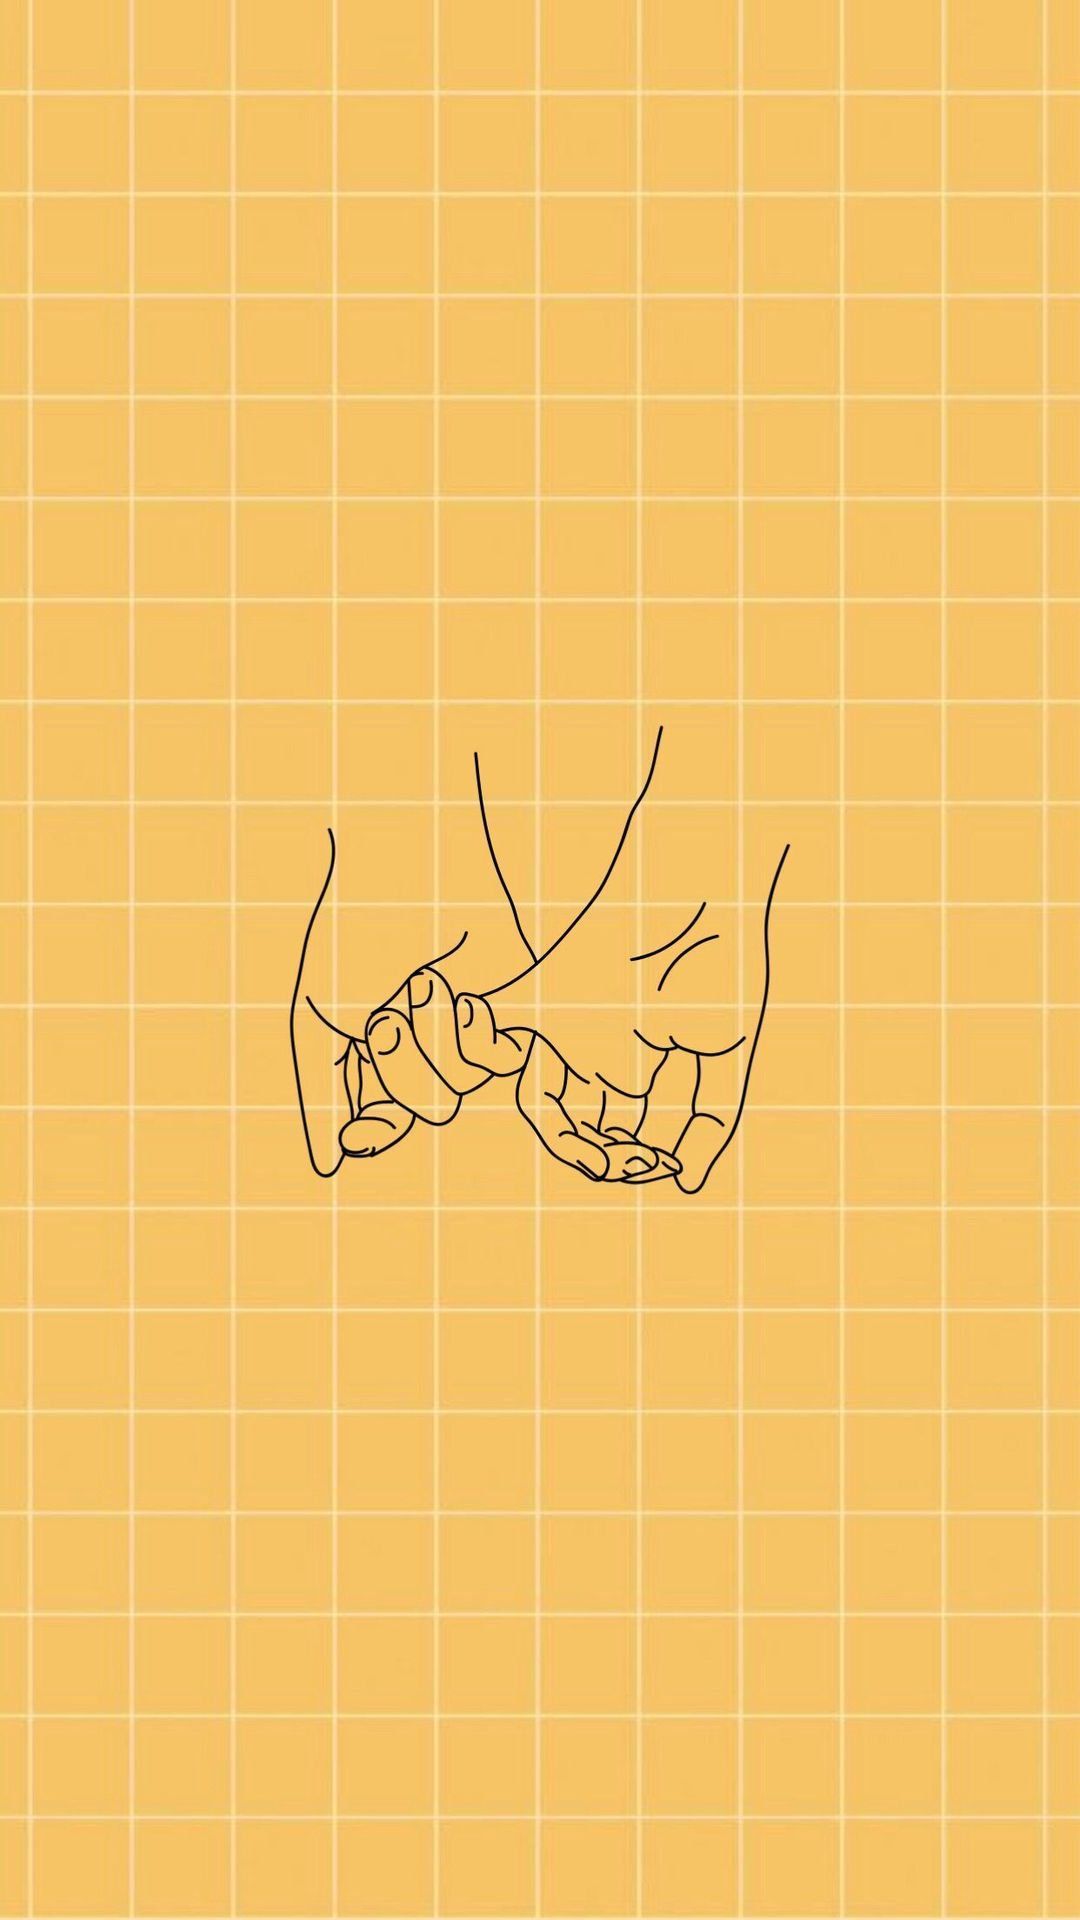 Two hands holding pinky fingers together on a yellow grid background - Honey